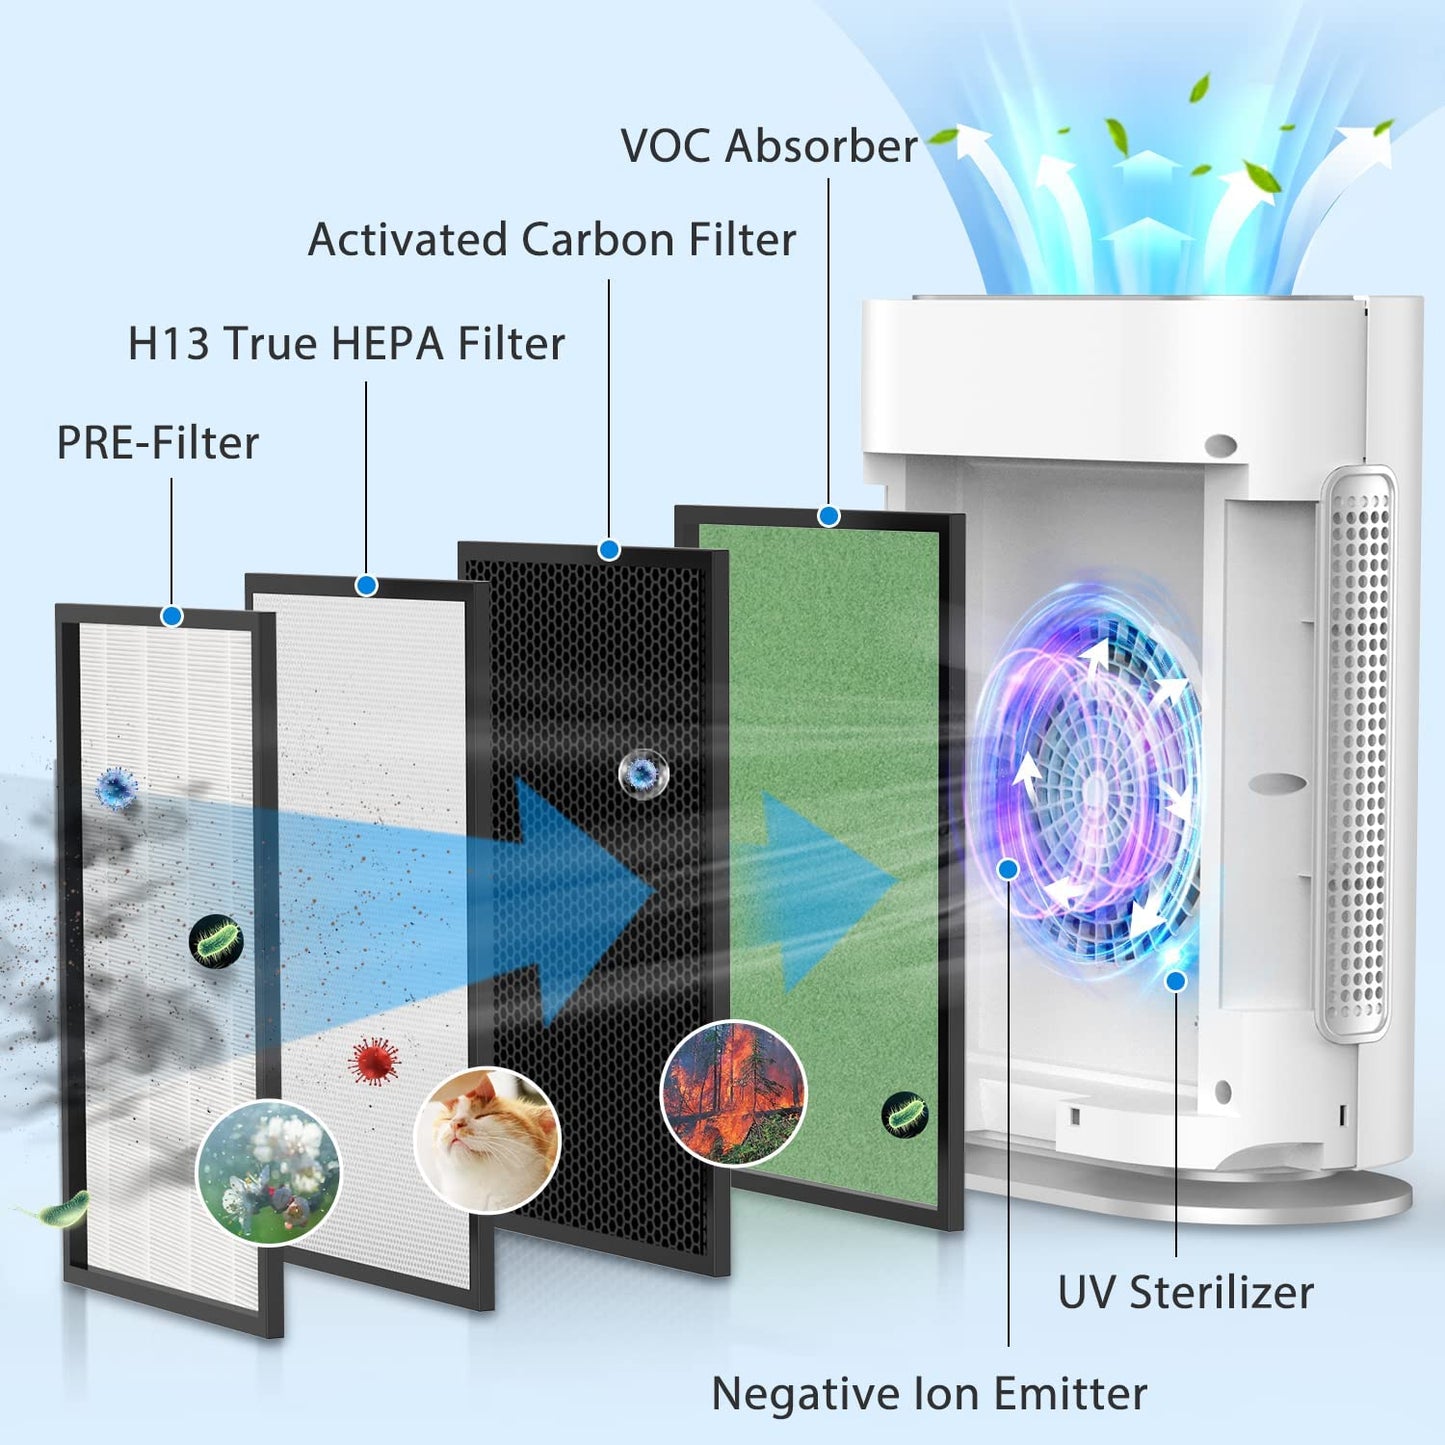 Semiocthome Home Air Purifier for Large Room up to 2100 sq.ft, Upgraded H13 True HEPA Filter, UV Light, Ionic Air Cleaner with Air Quality Sensors, GL-FS32 White